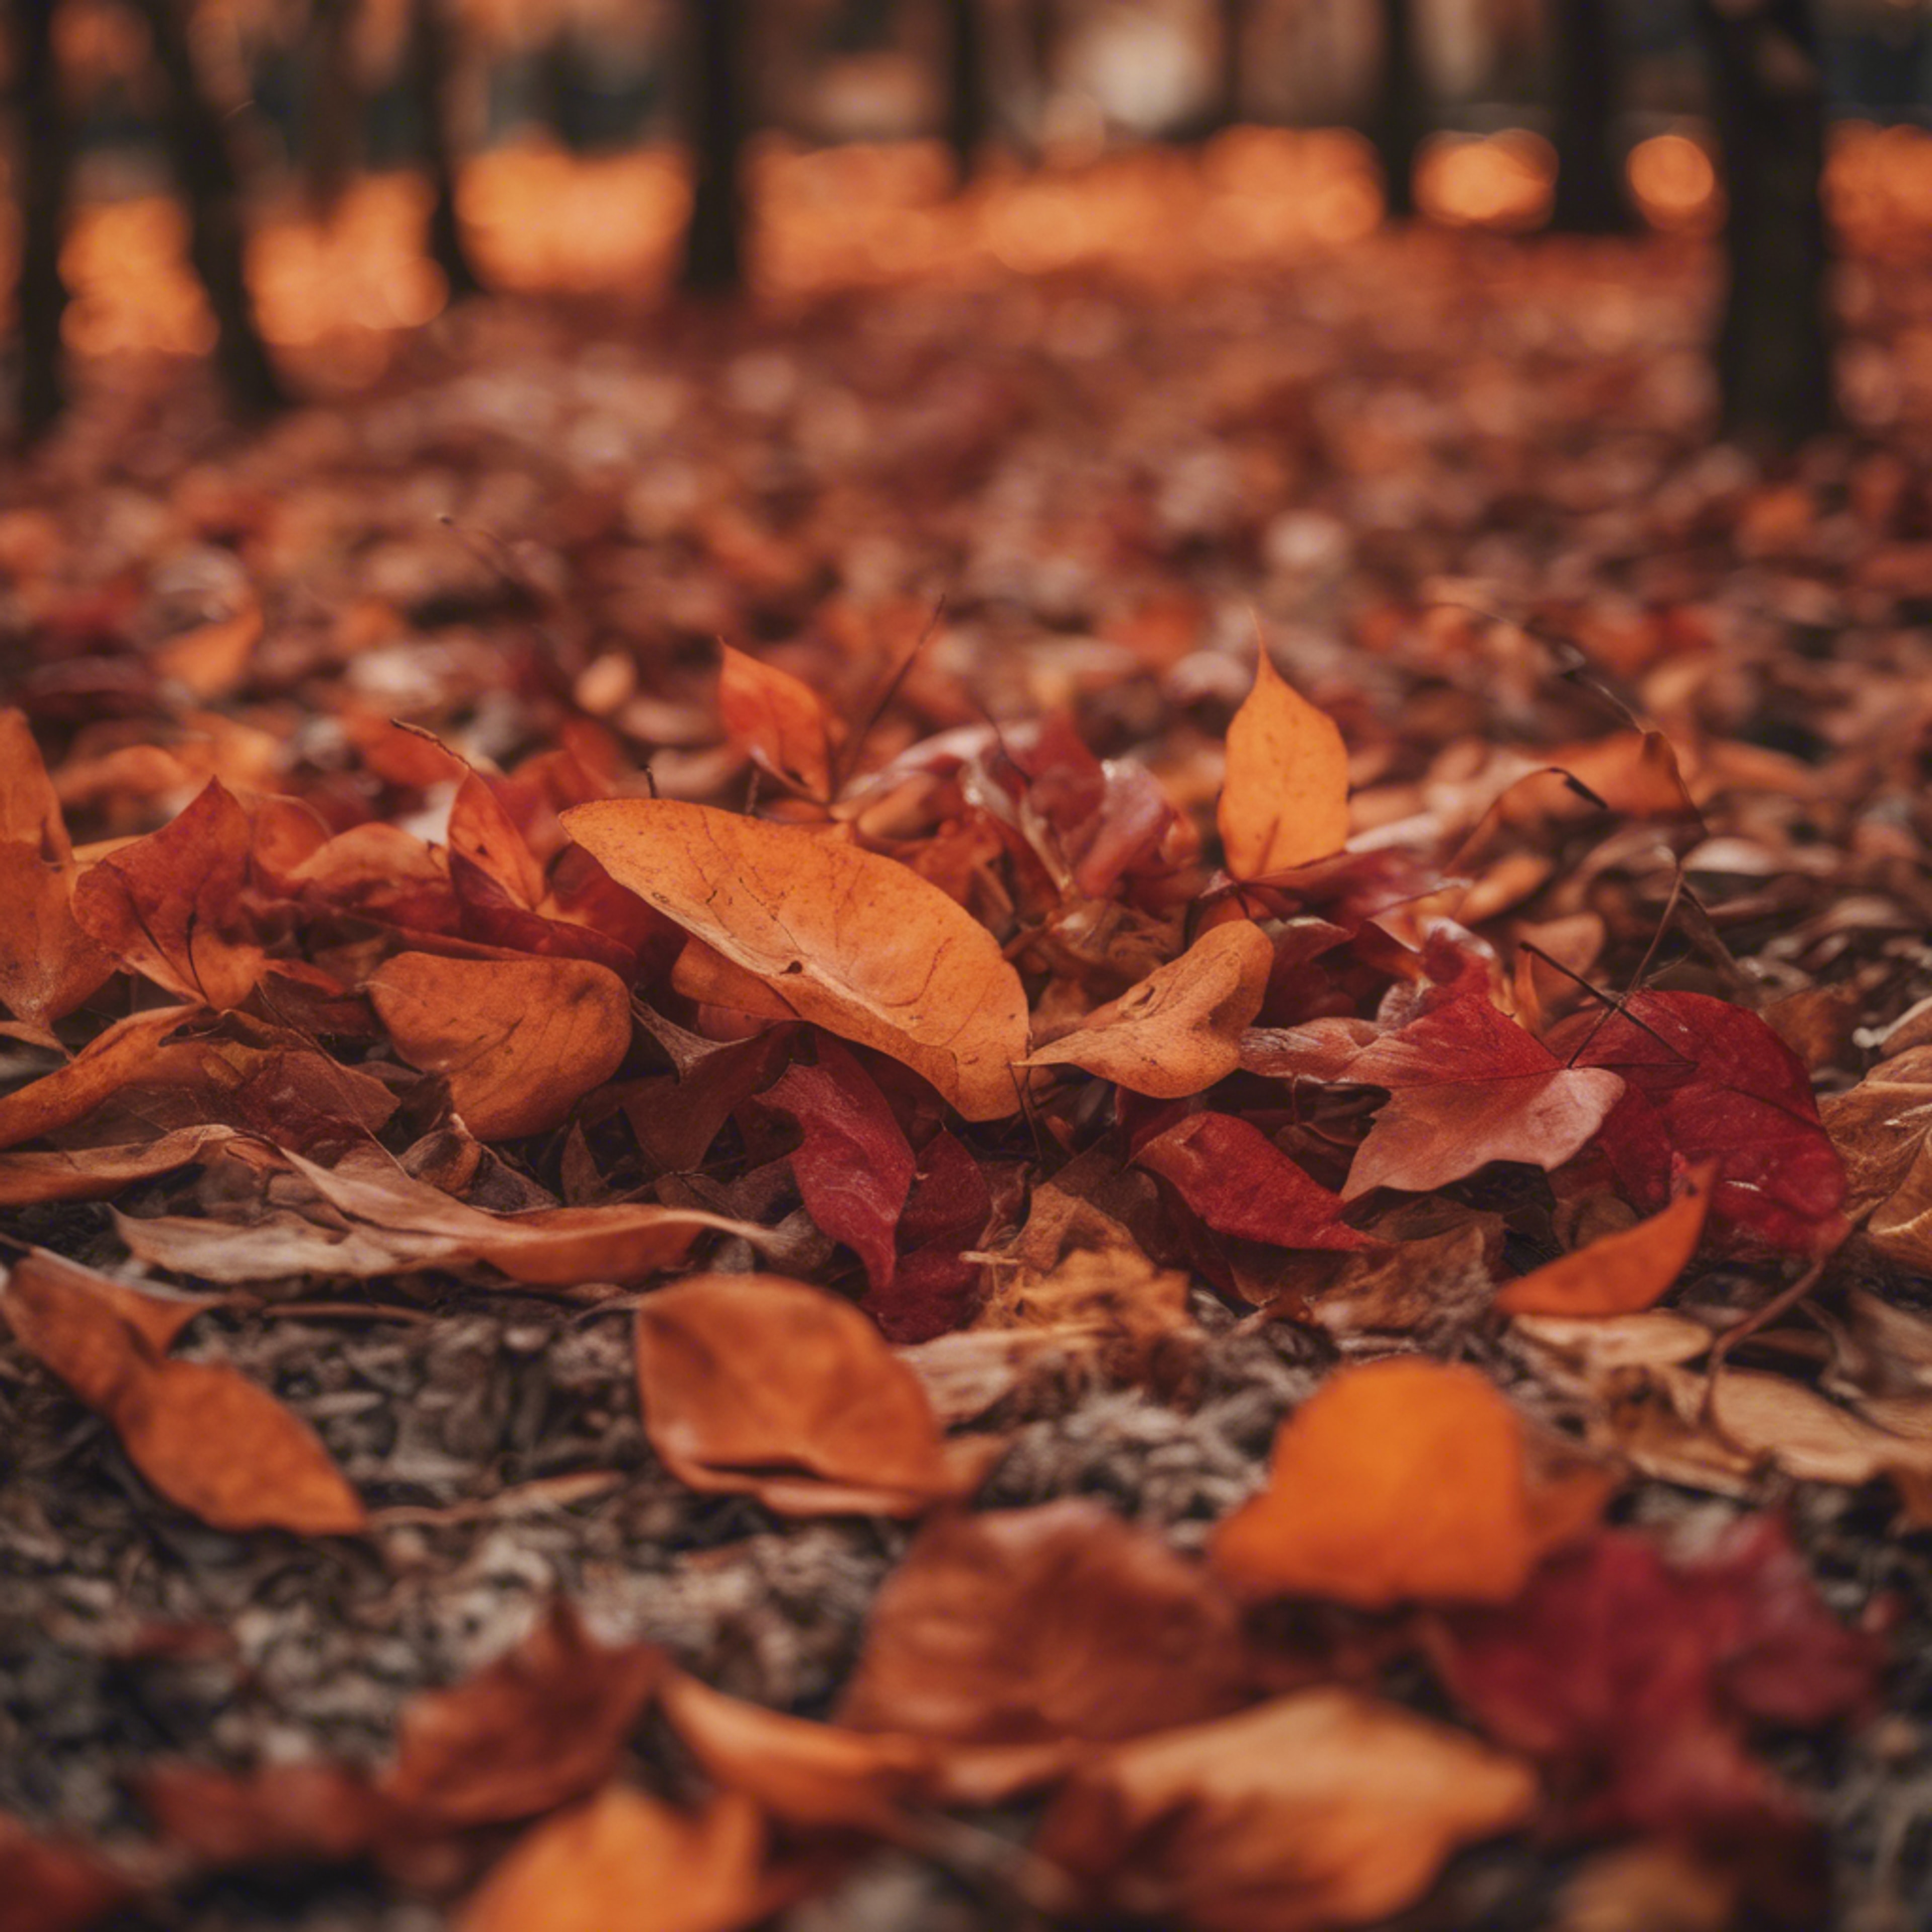 A fiery autumnal garden, ablaze with hues of oranges, reds, and browns, carpeted with fallen leaves.壁紙[7a9158193afd461da080]